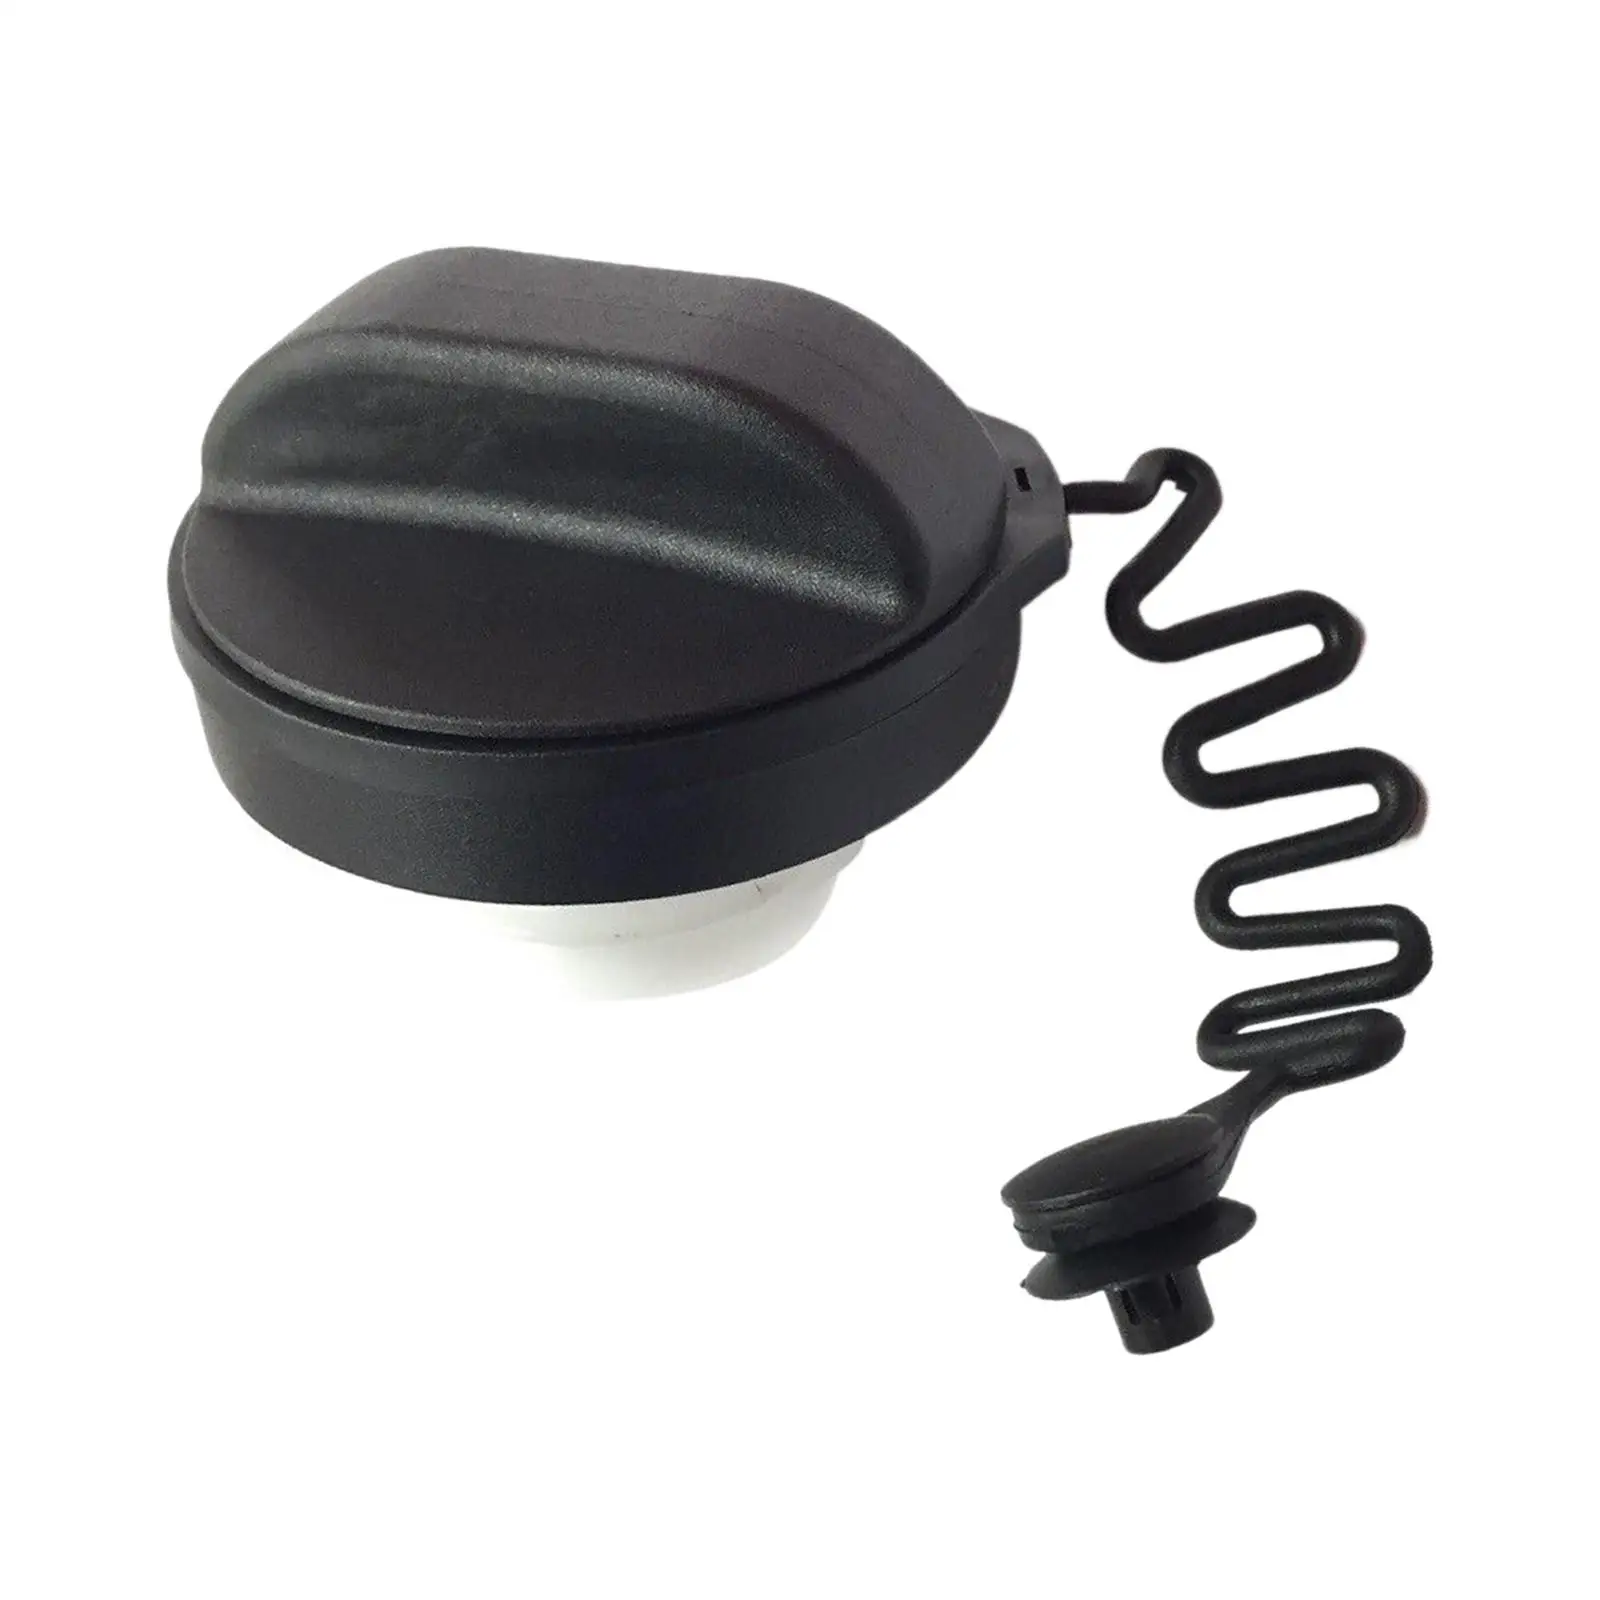 Fuel Filler Cap Car Accessories, Replacement Gas Cap for Models with Screw in